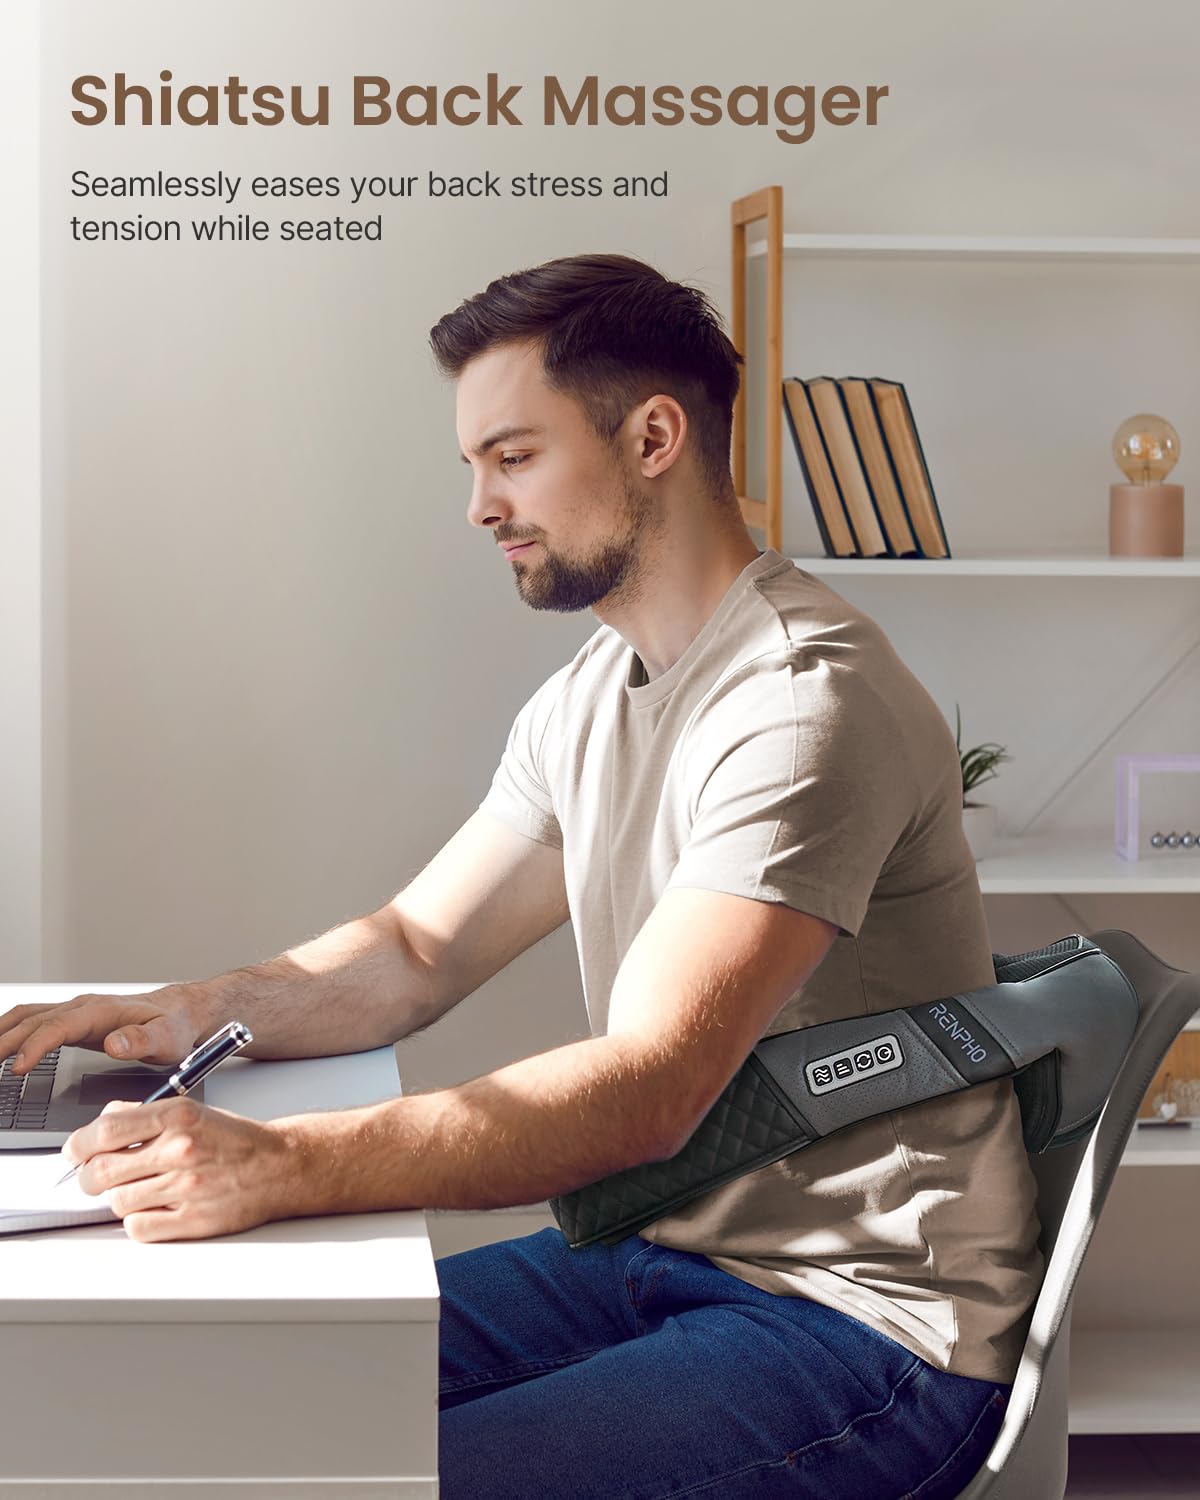 Man using a U-Neck 2 Neck & Shoulders Massager while working on a computer in a serene home office setting.